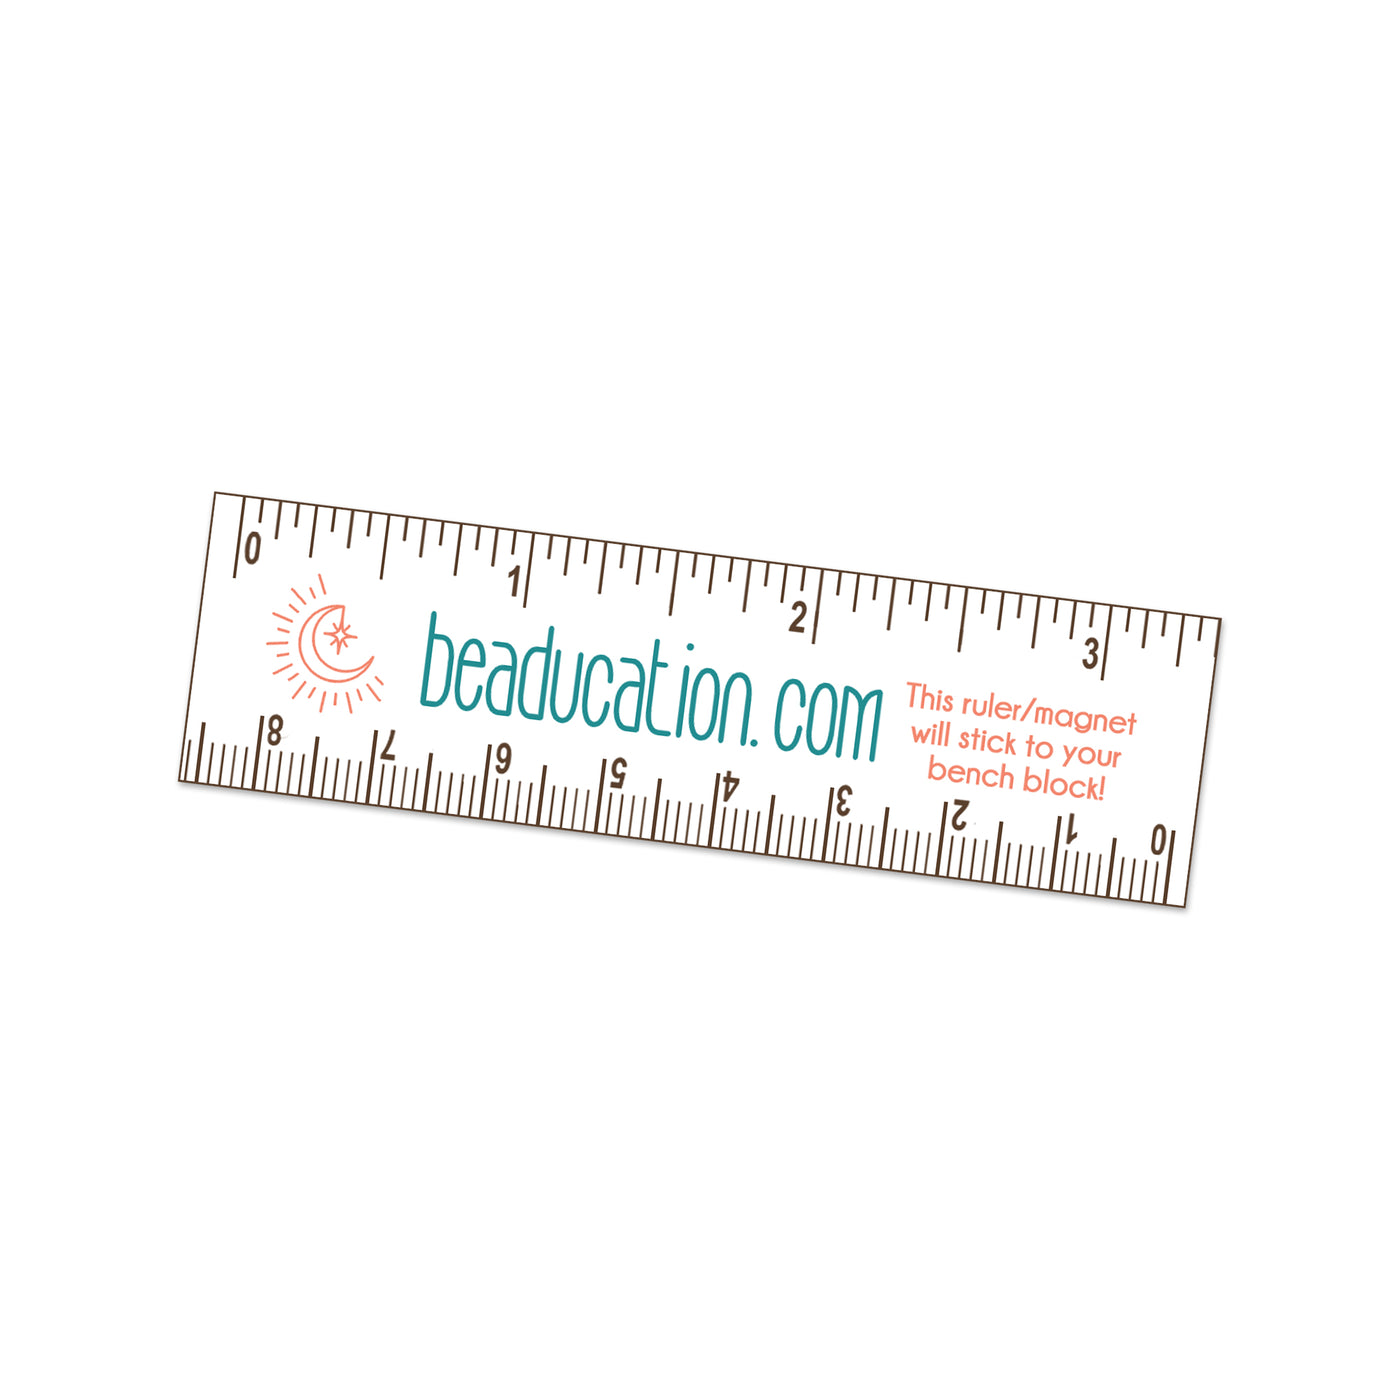 Quick guide  Millimeter ruler, Card making accessories, Helpful hints